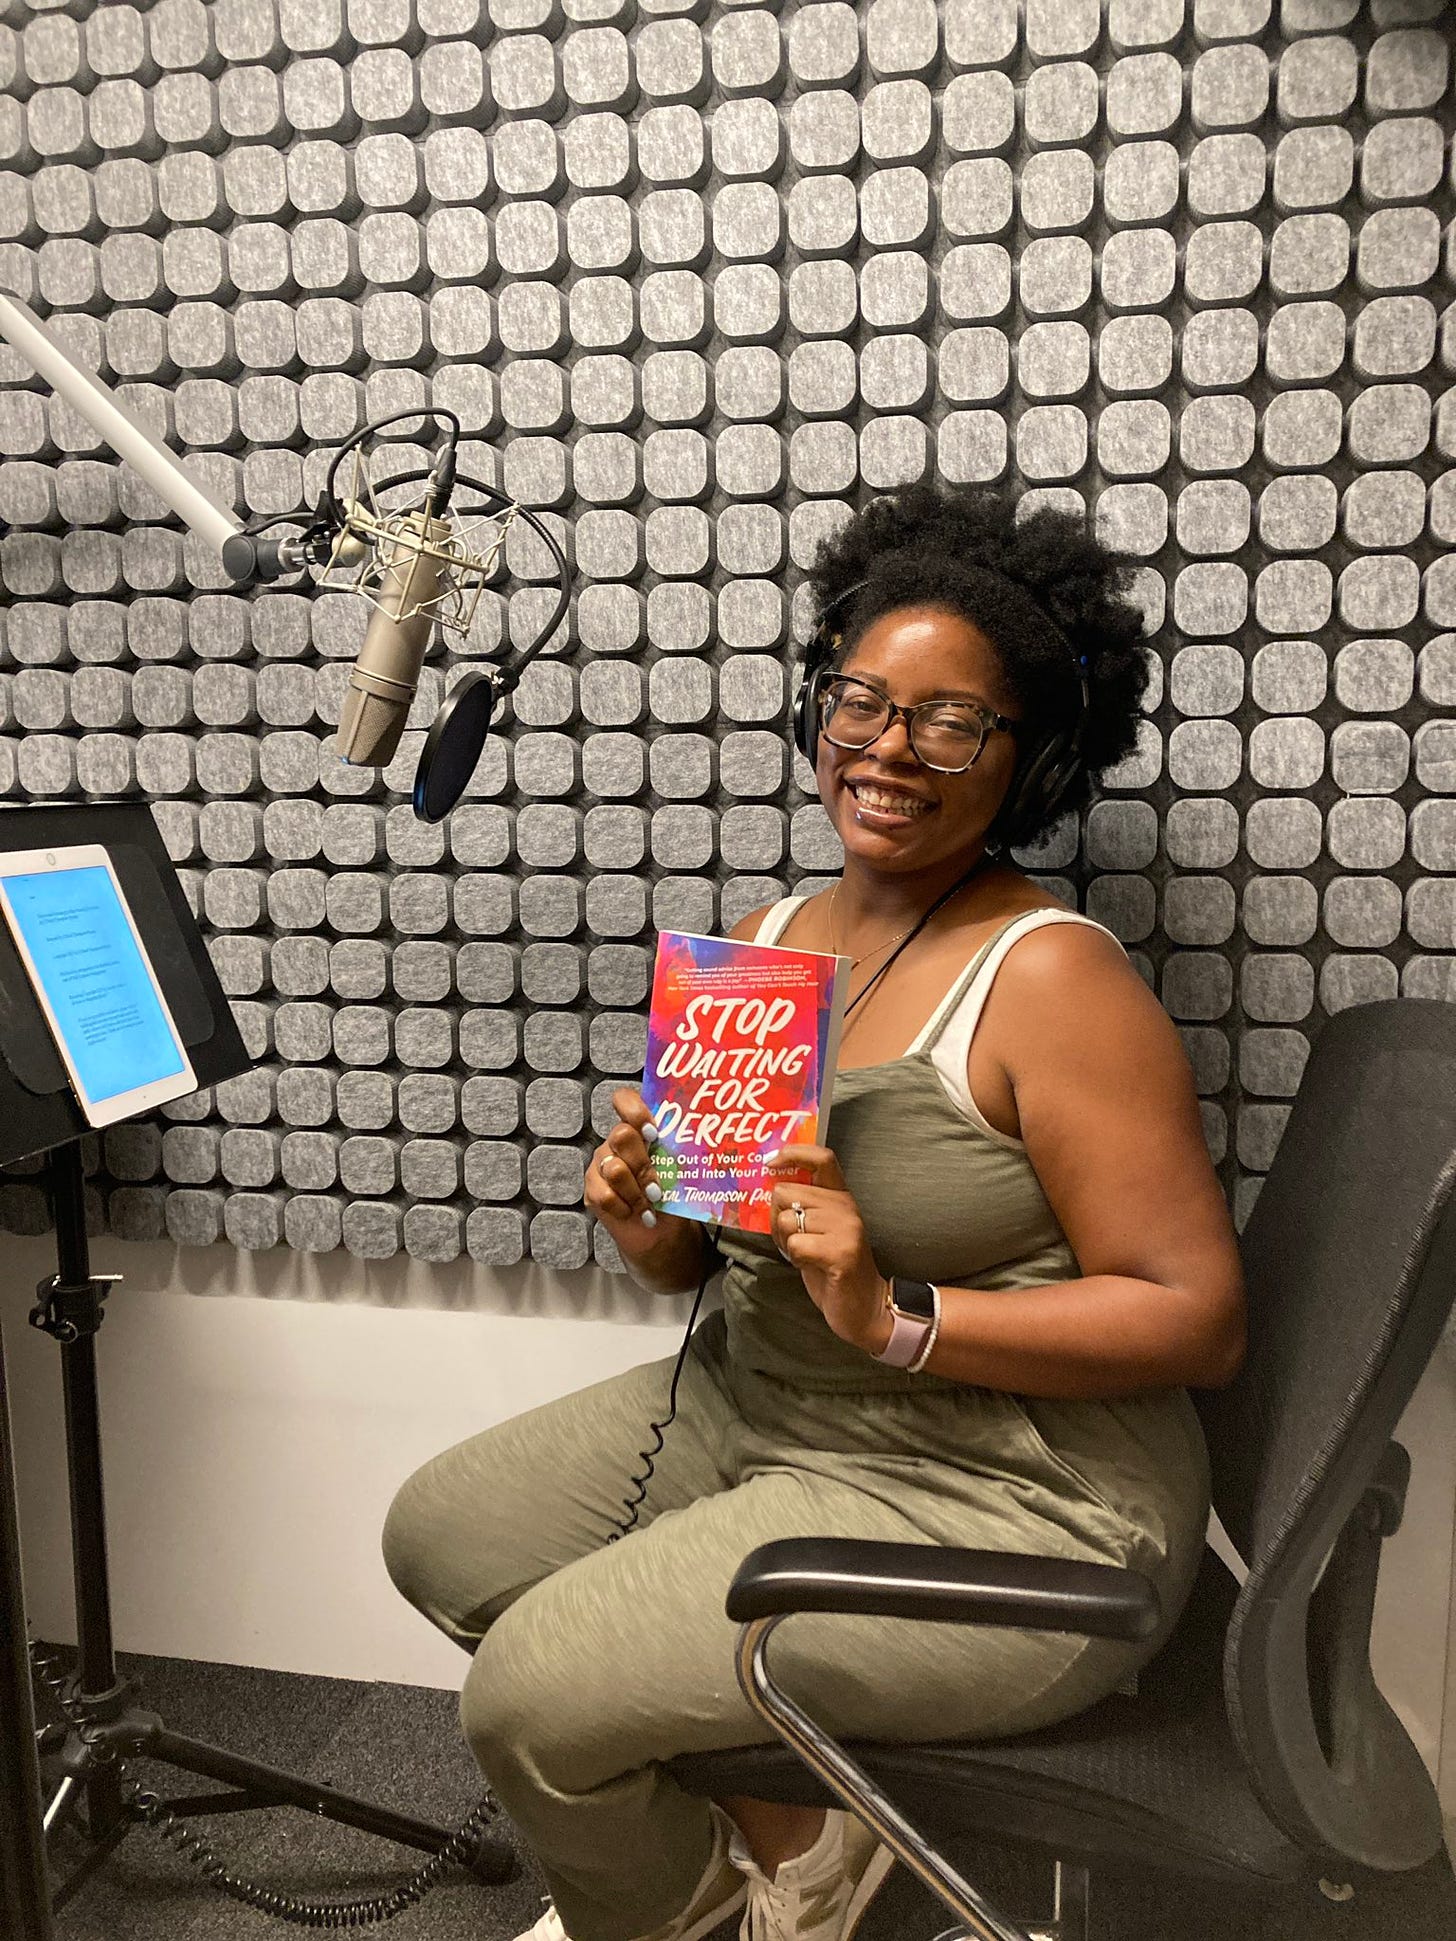 Black woman in a recording booth wearing headphones and dressed in green overalls holding a book